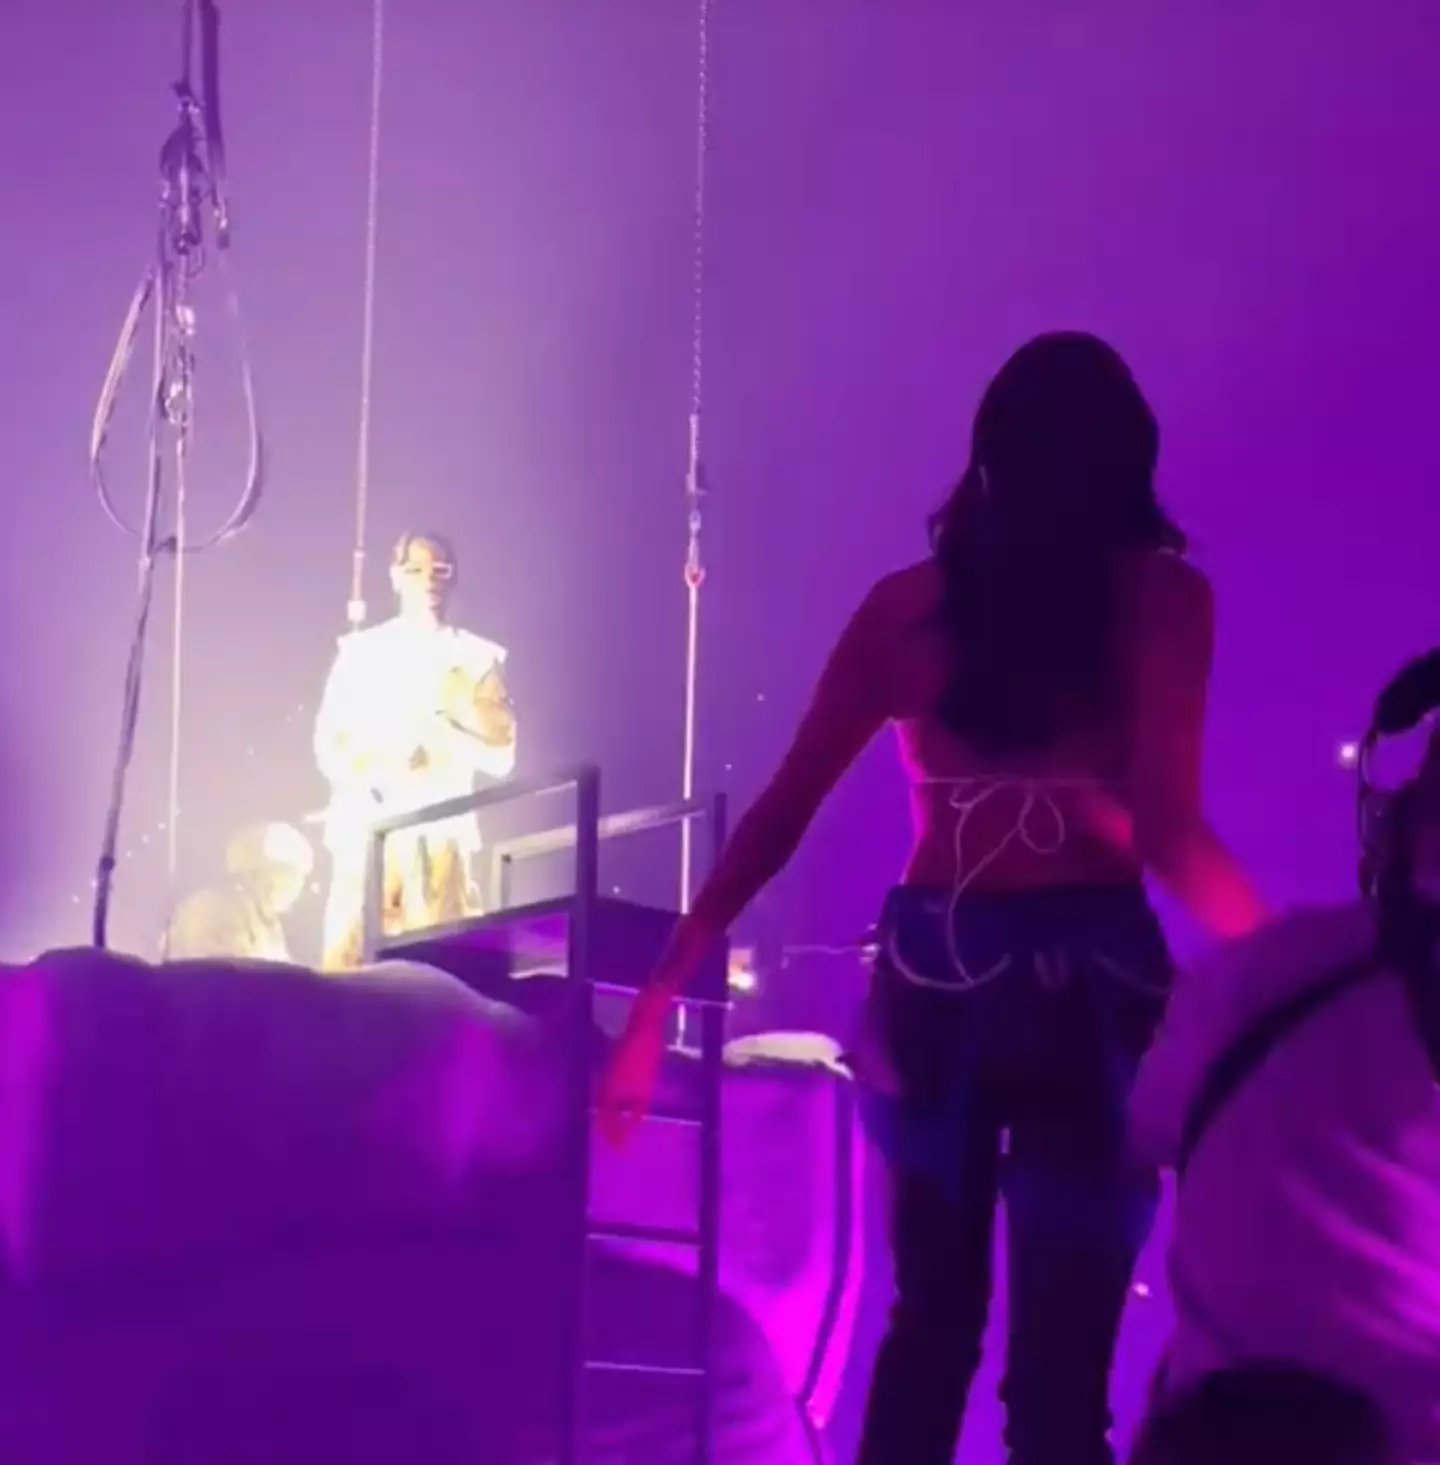 Another girl got up on stage instead.